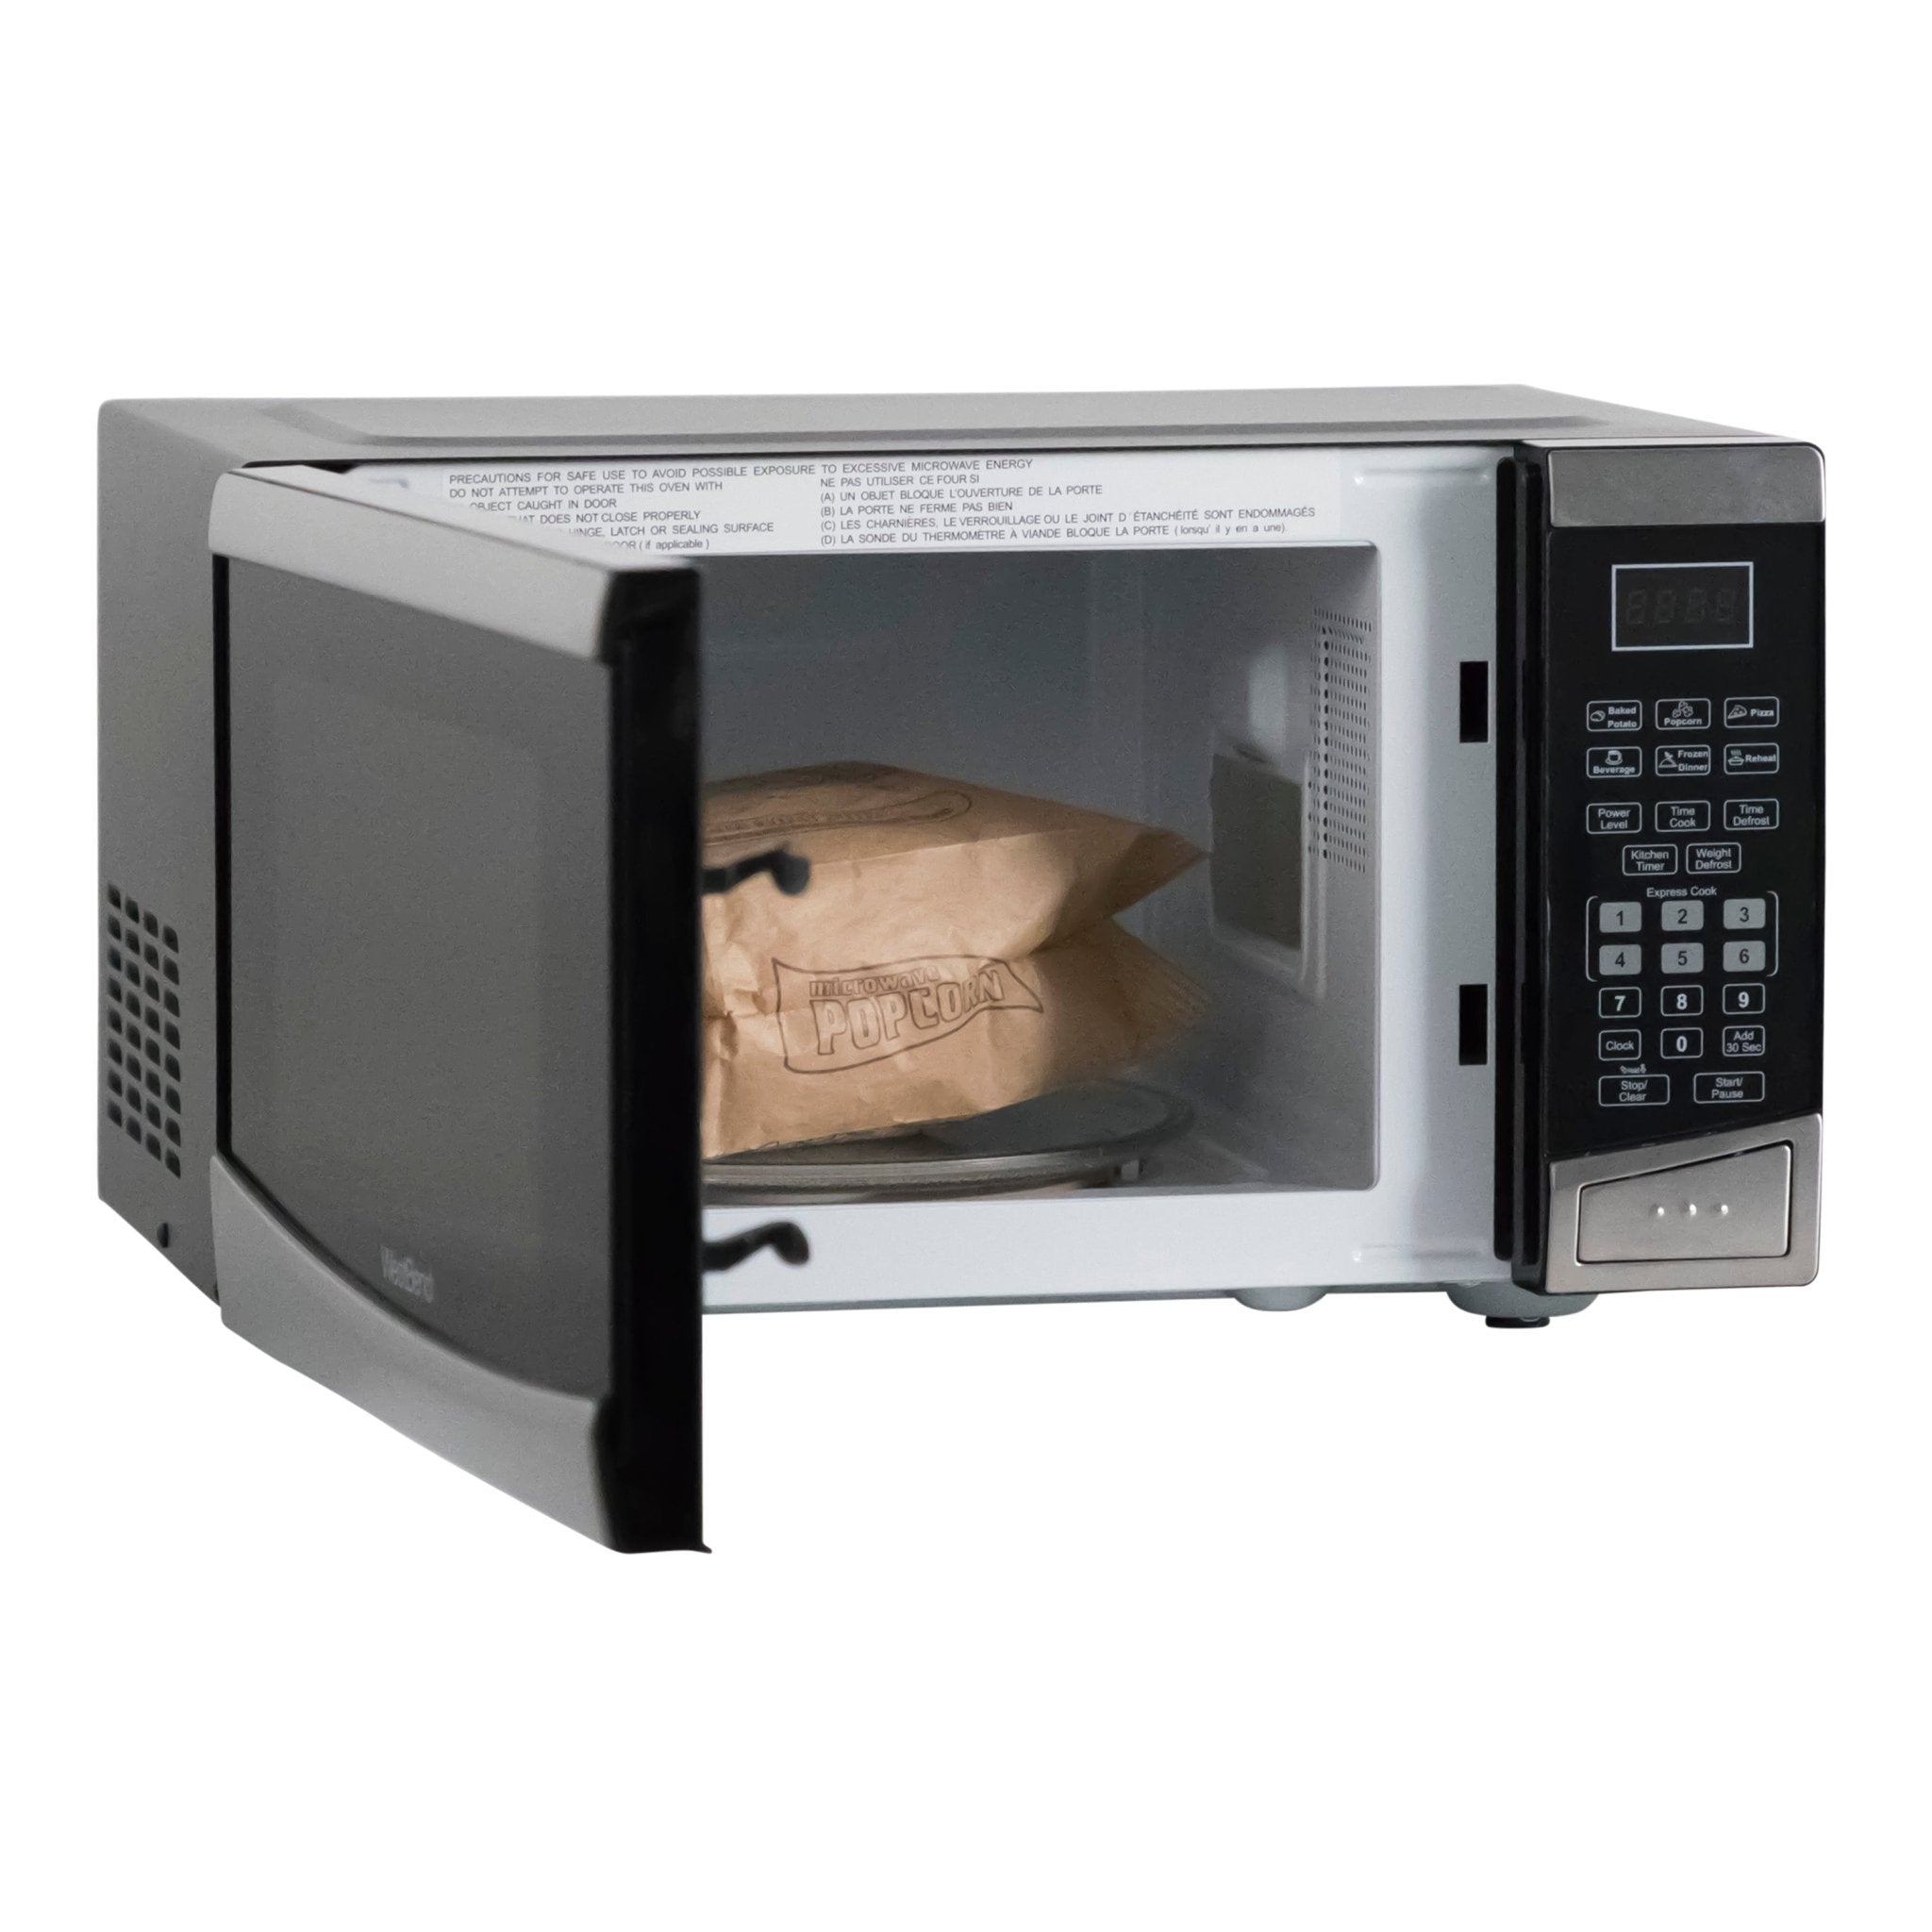 West Bend 0.9 Cu. ft. Microwave Oven Stainless Steel